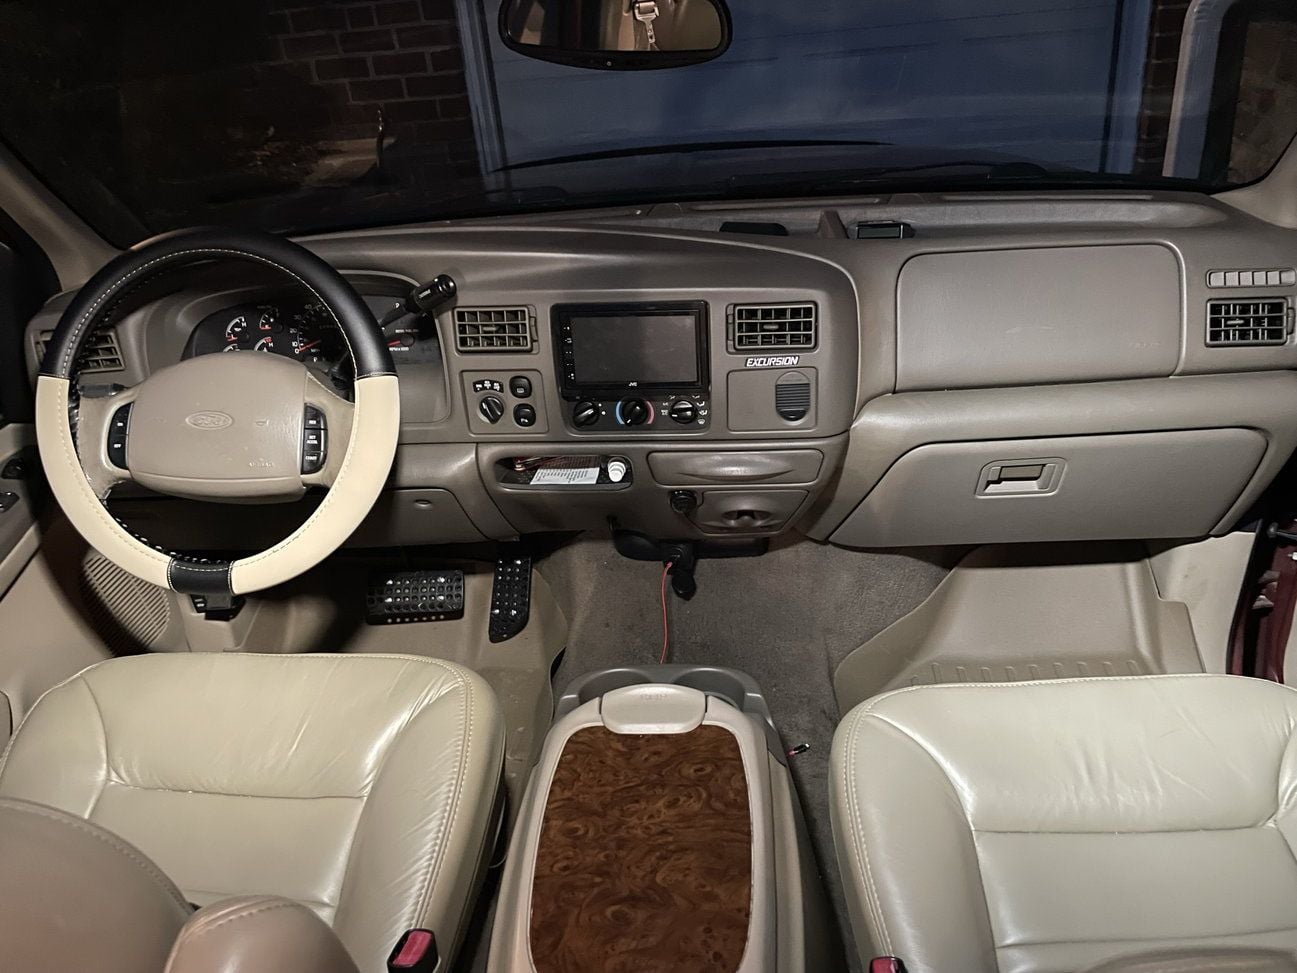 2000 Ford Excursion - 2000 Ford Excursion Limited, 7.3L, 4x4. - Used - VIN 1FMSU43F7YEE34771 - 8 cyl - 4WD - Automatic - SUV - Red - Cheverly, MD 20785, United States